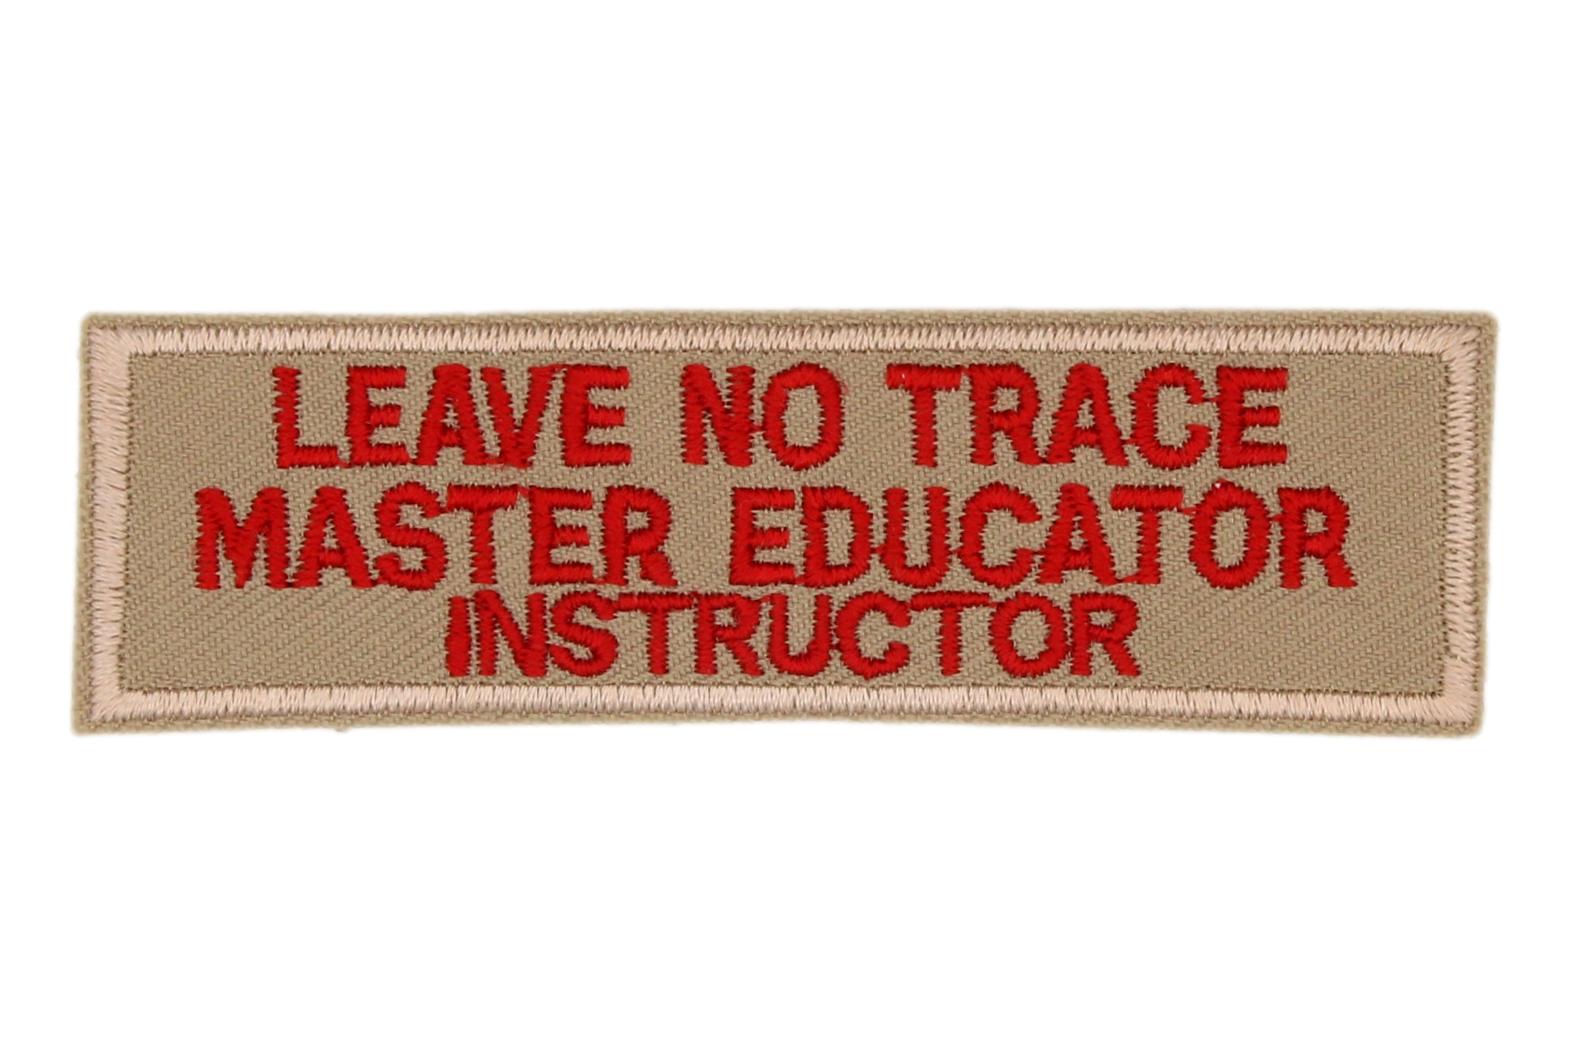 Leave No Trace Strip Master Educator Instructor Red